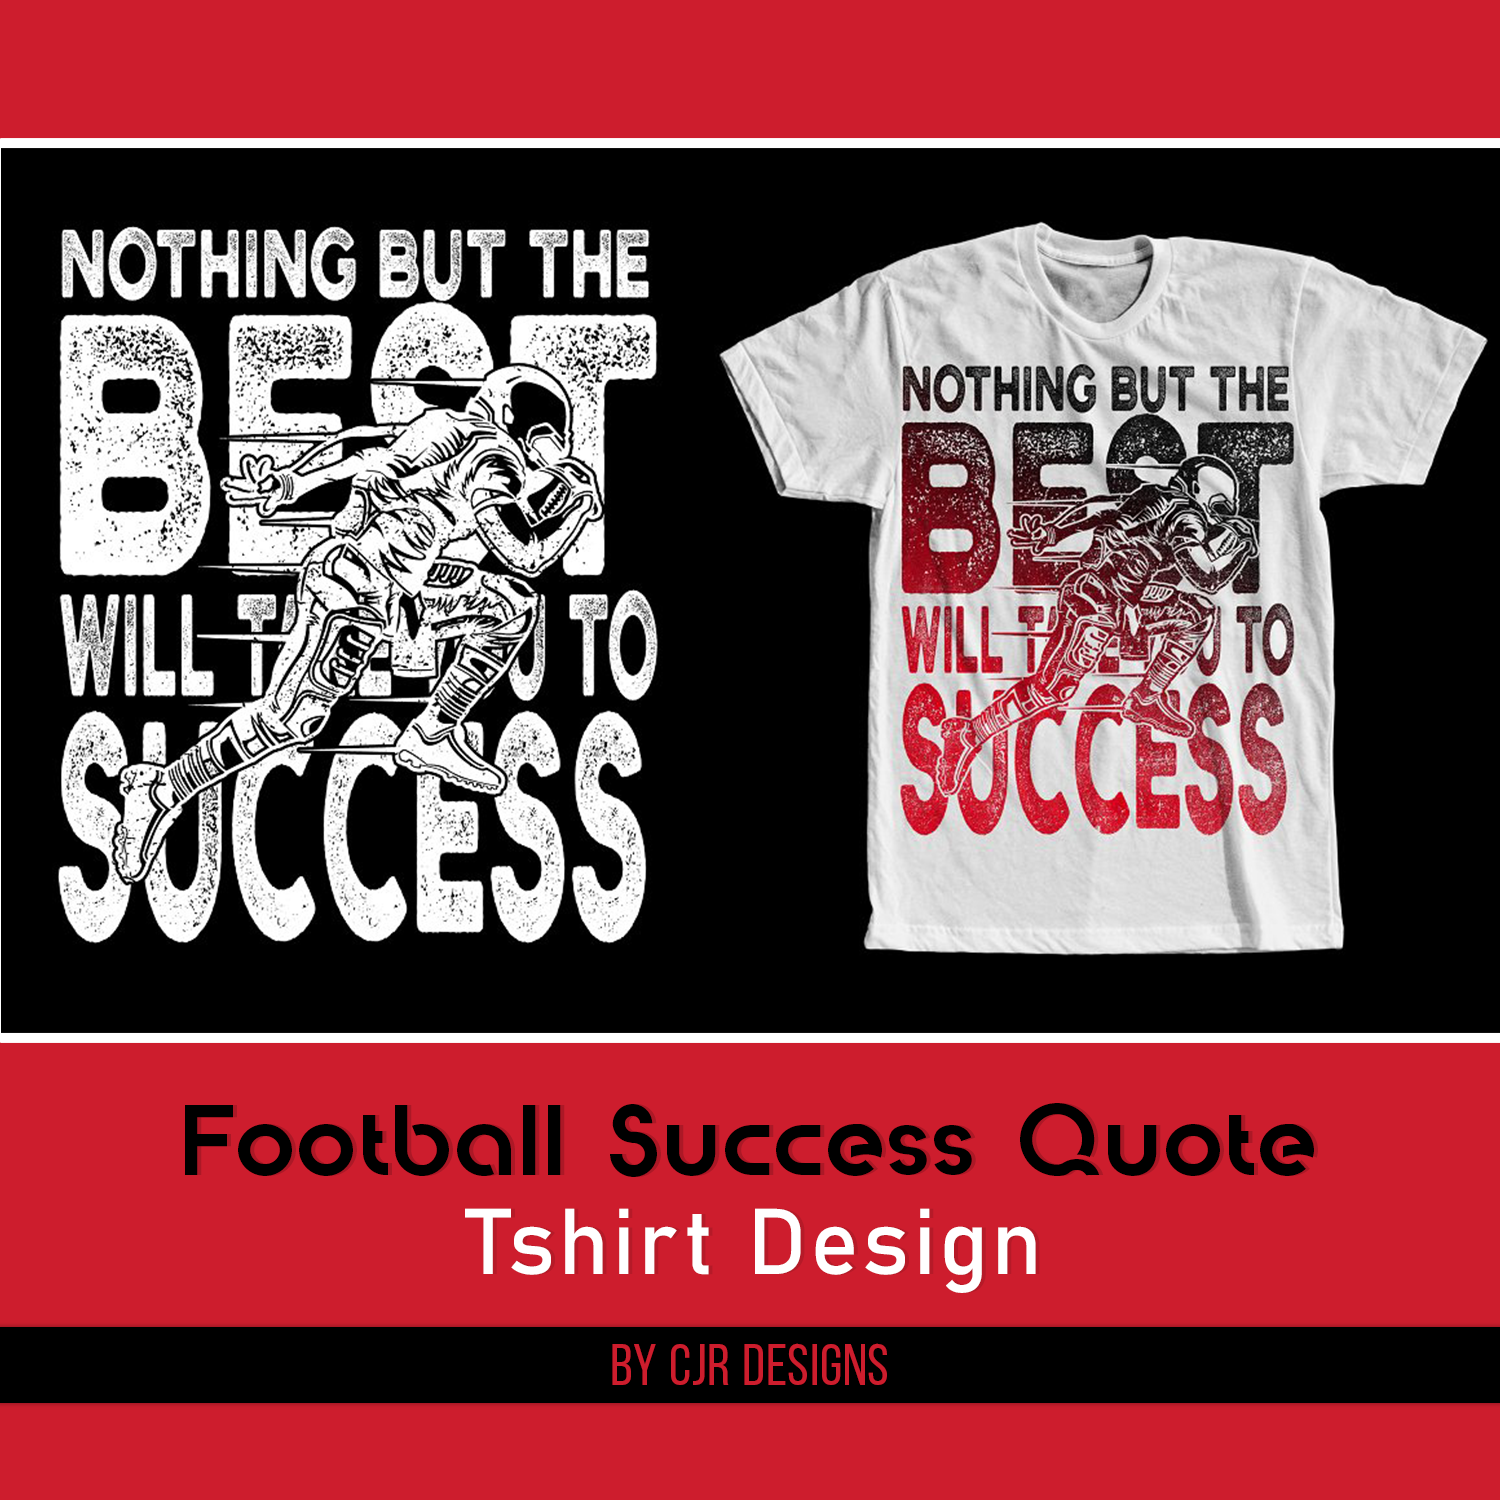 Preview football success quote tshirt design.